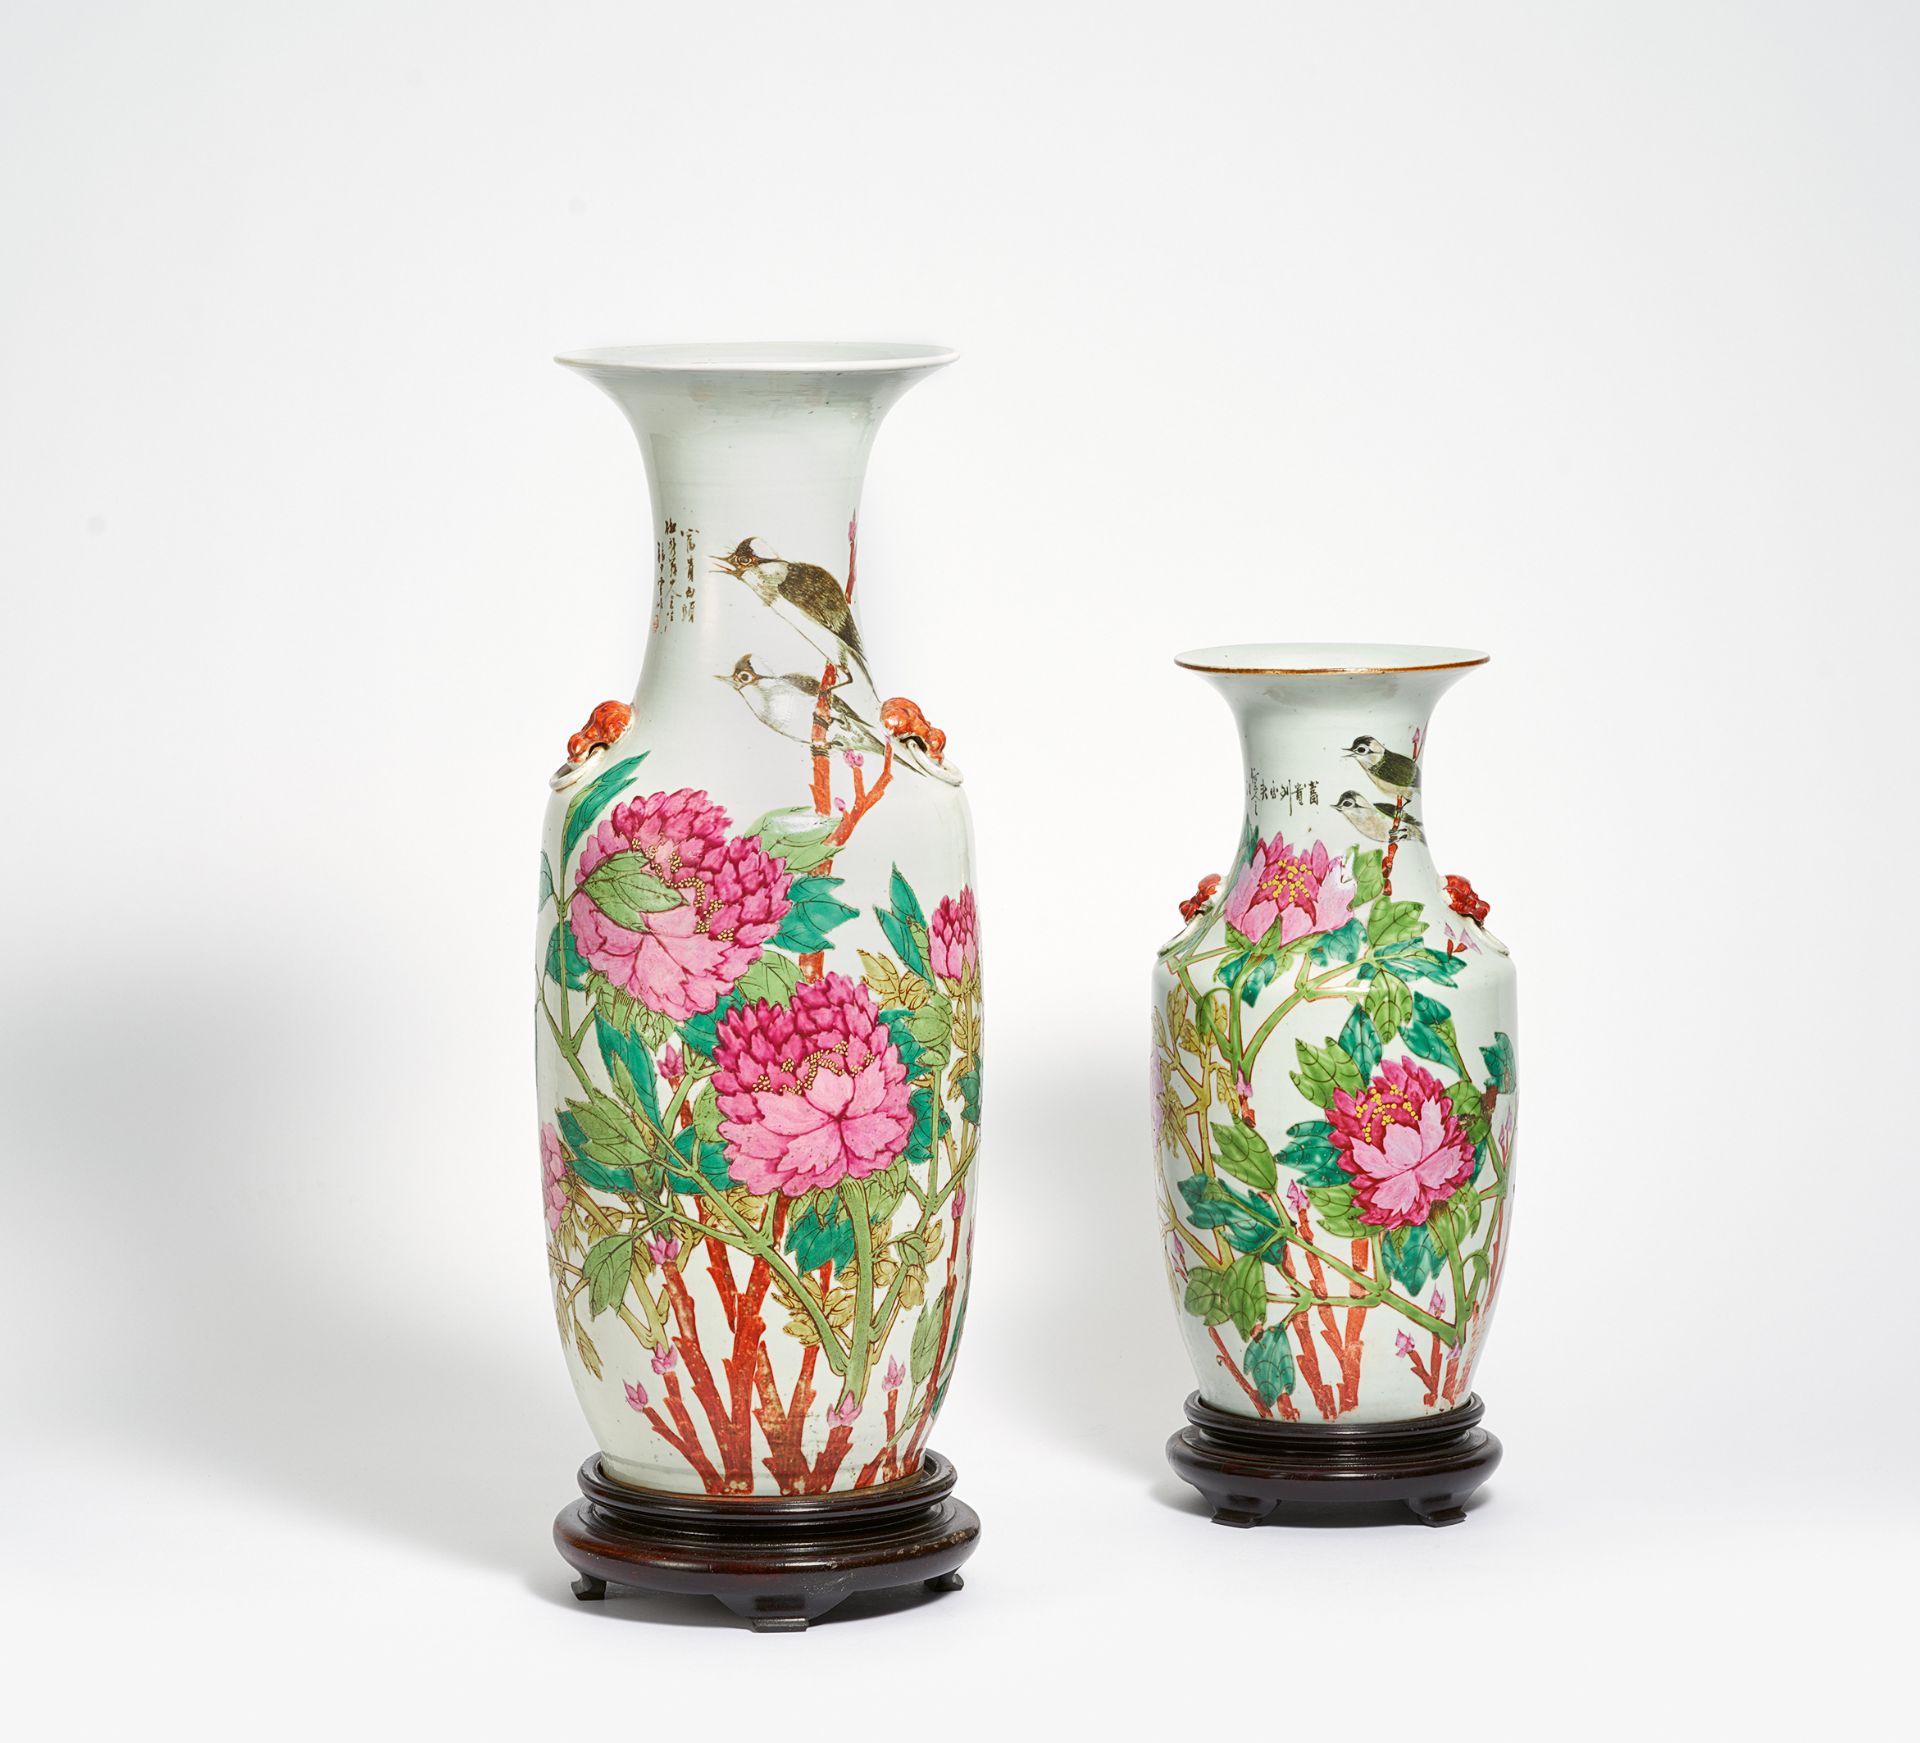 TWO VASES WITH CHINESE BULBULS IN SPLENDID PEONIES. China. Beg. 20th c. Porcelain famille rose.